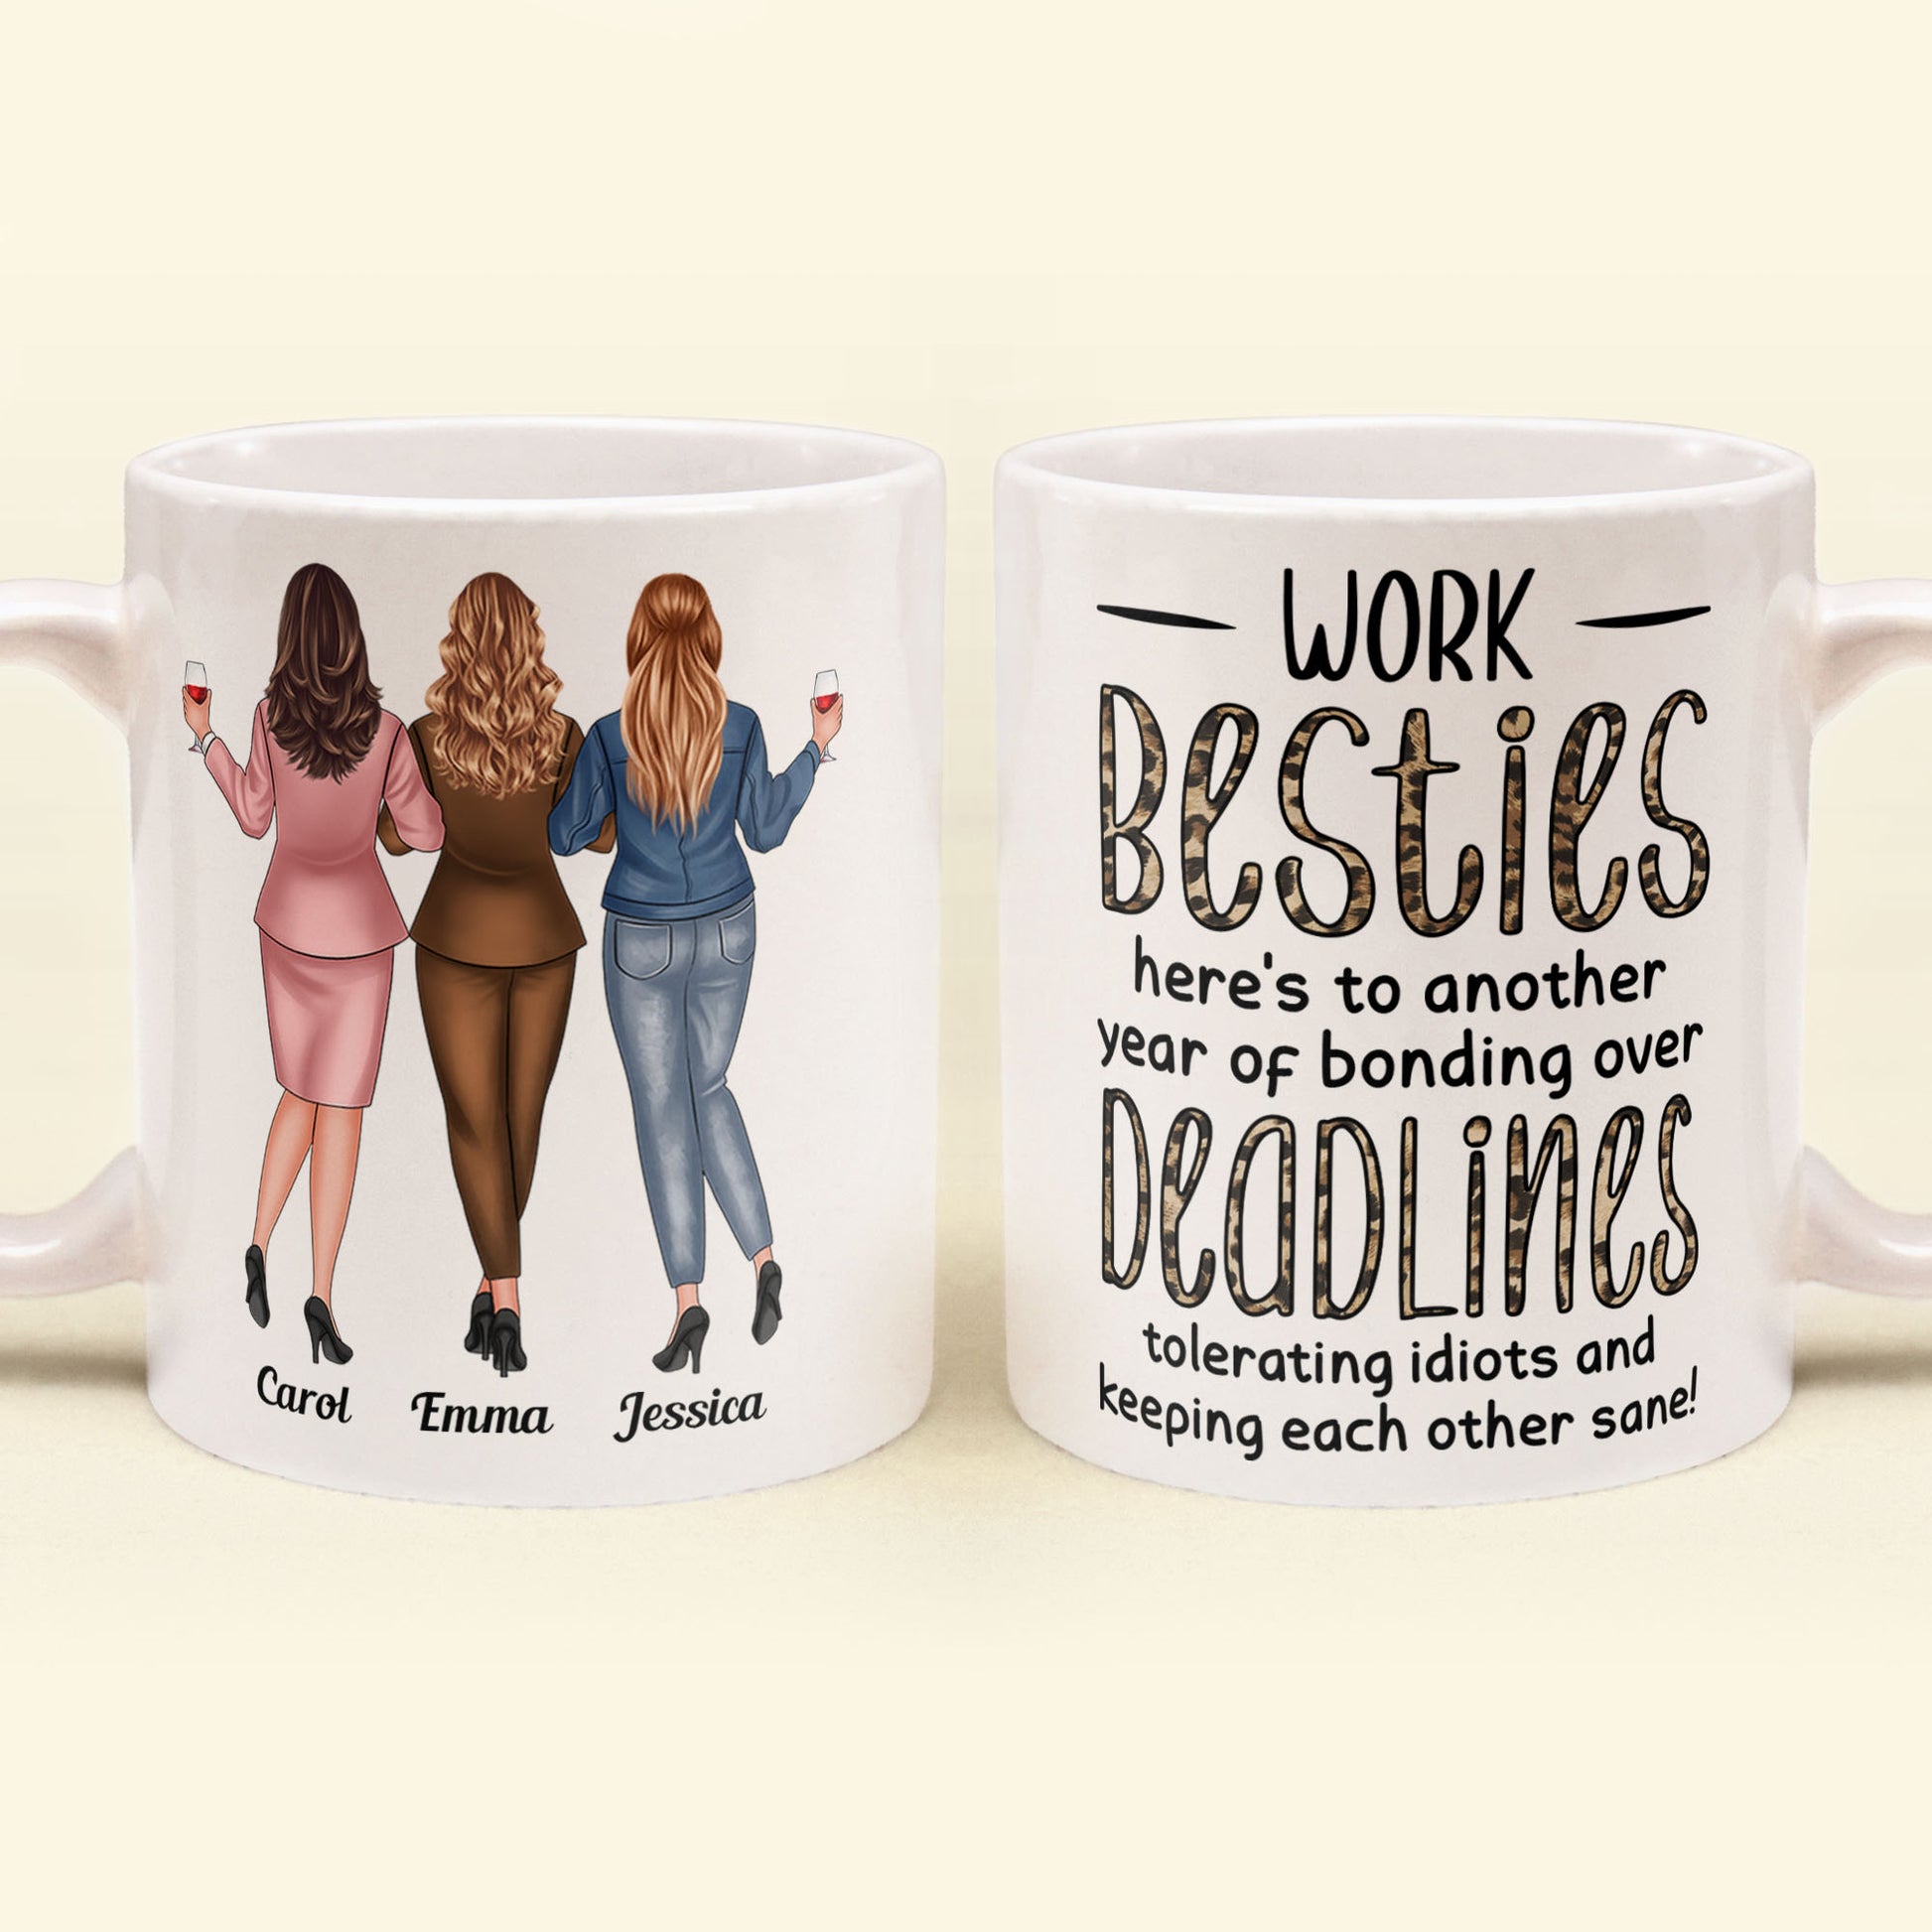 Coworkers, Alcohol Tolerating, Bonding Over Deadlines, Keeping Each Other Sane - Personalized Mug - Gift For Coworker, Colleague, Work Bestie, Friend, Work Bestie